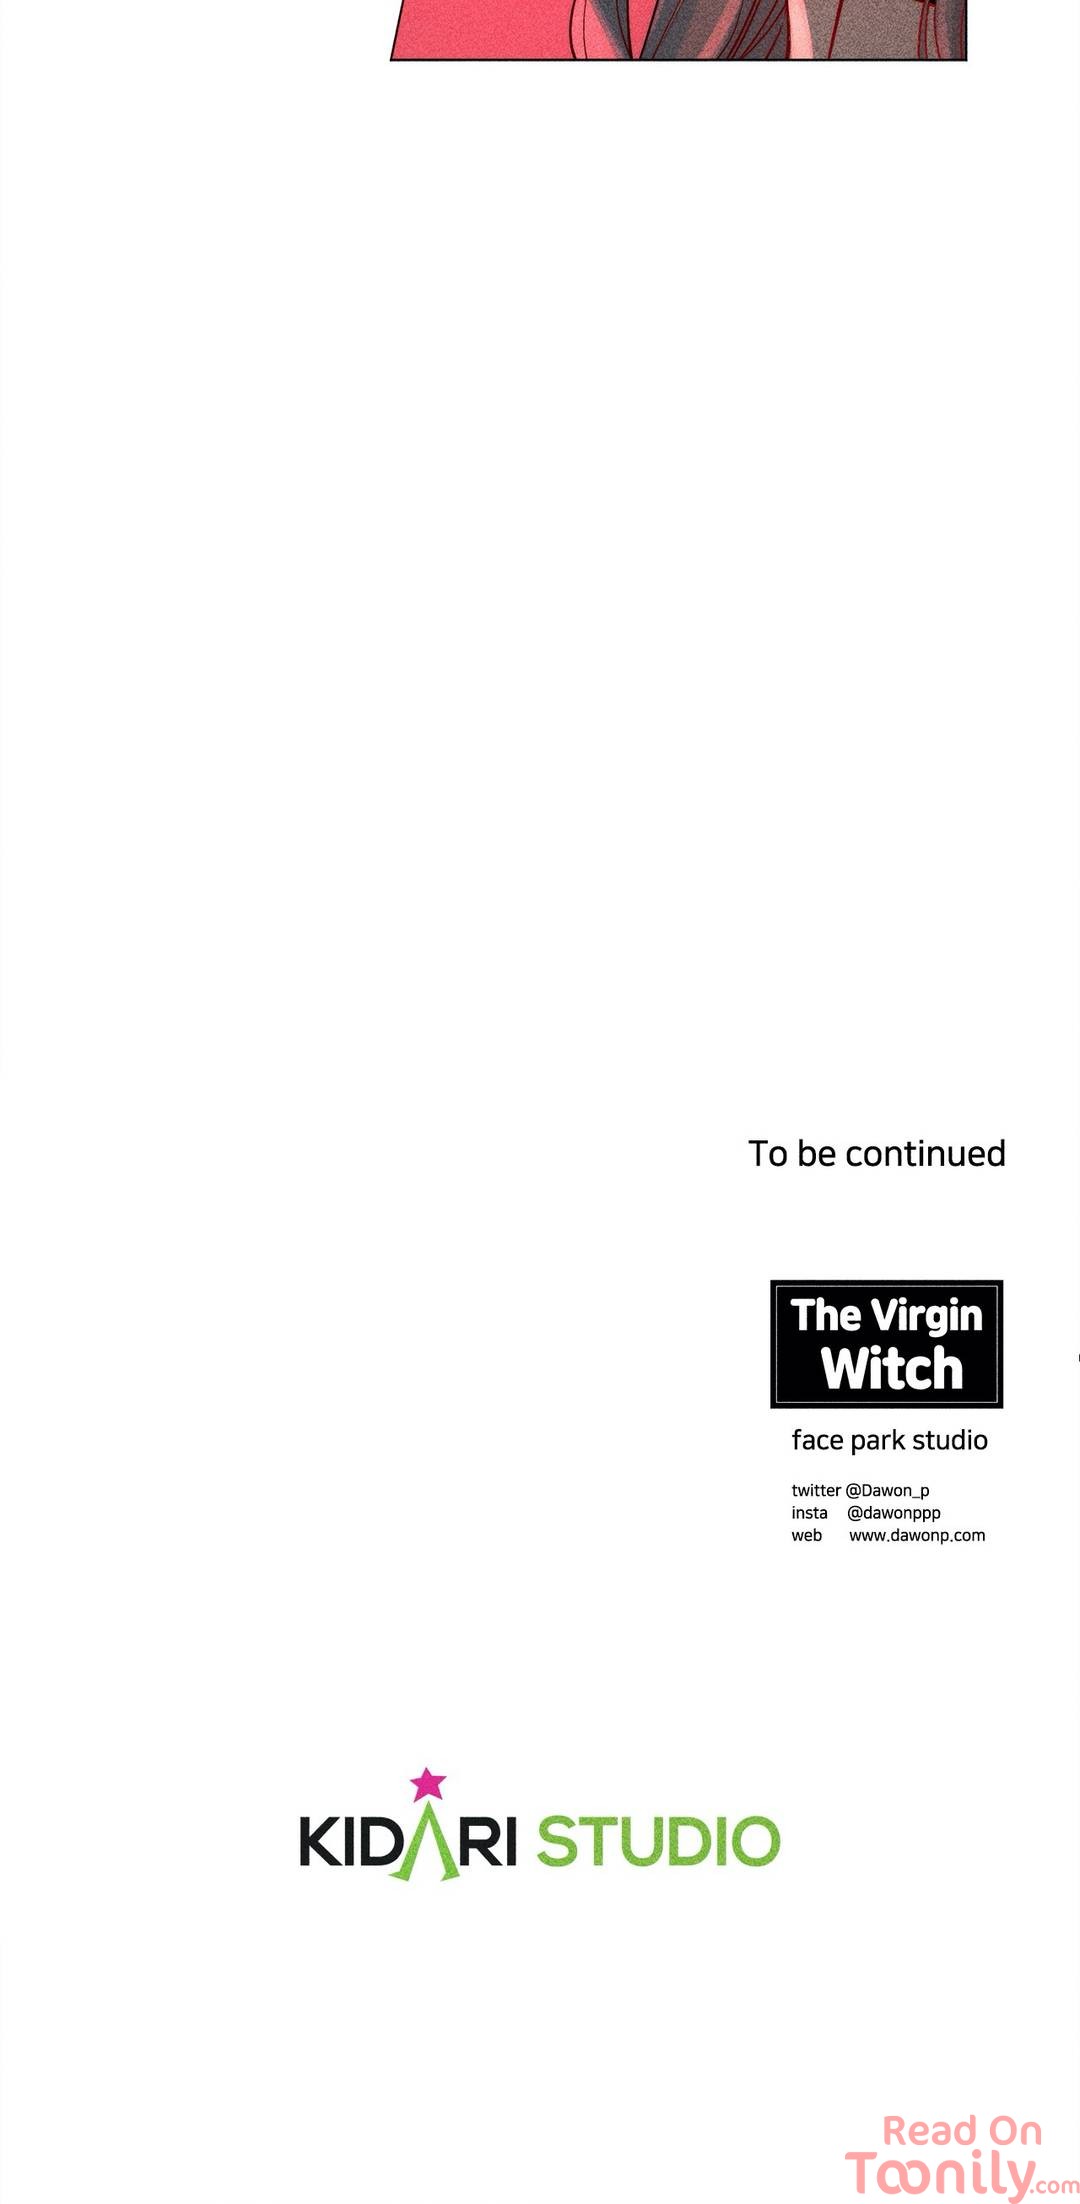 The Virgin Witch image